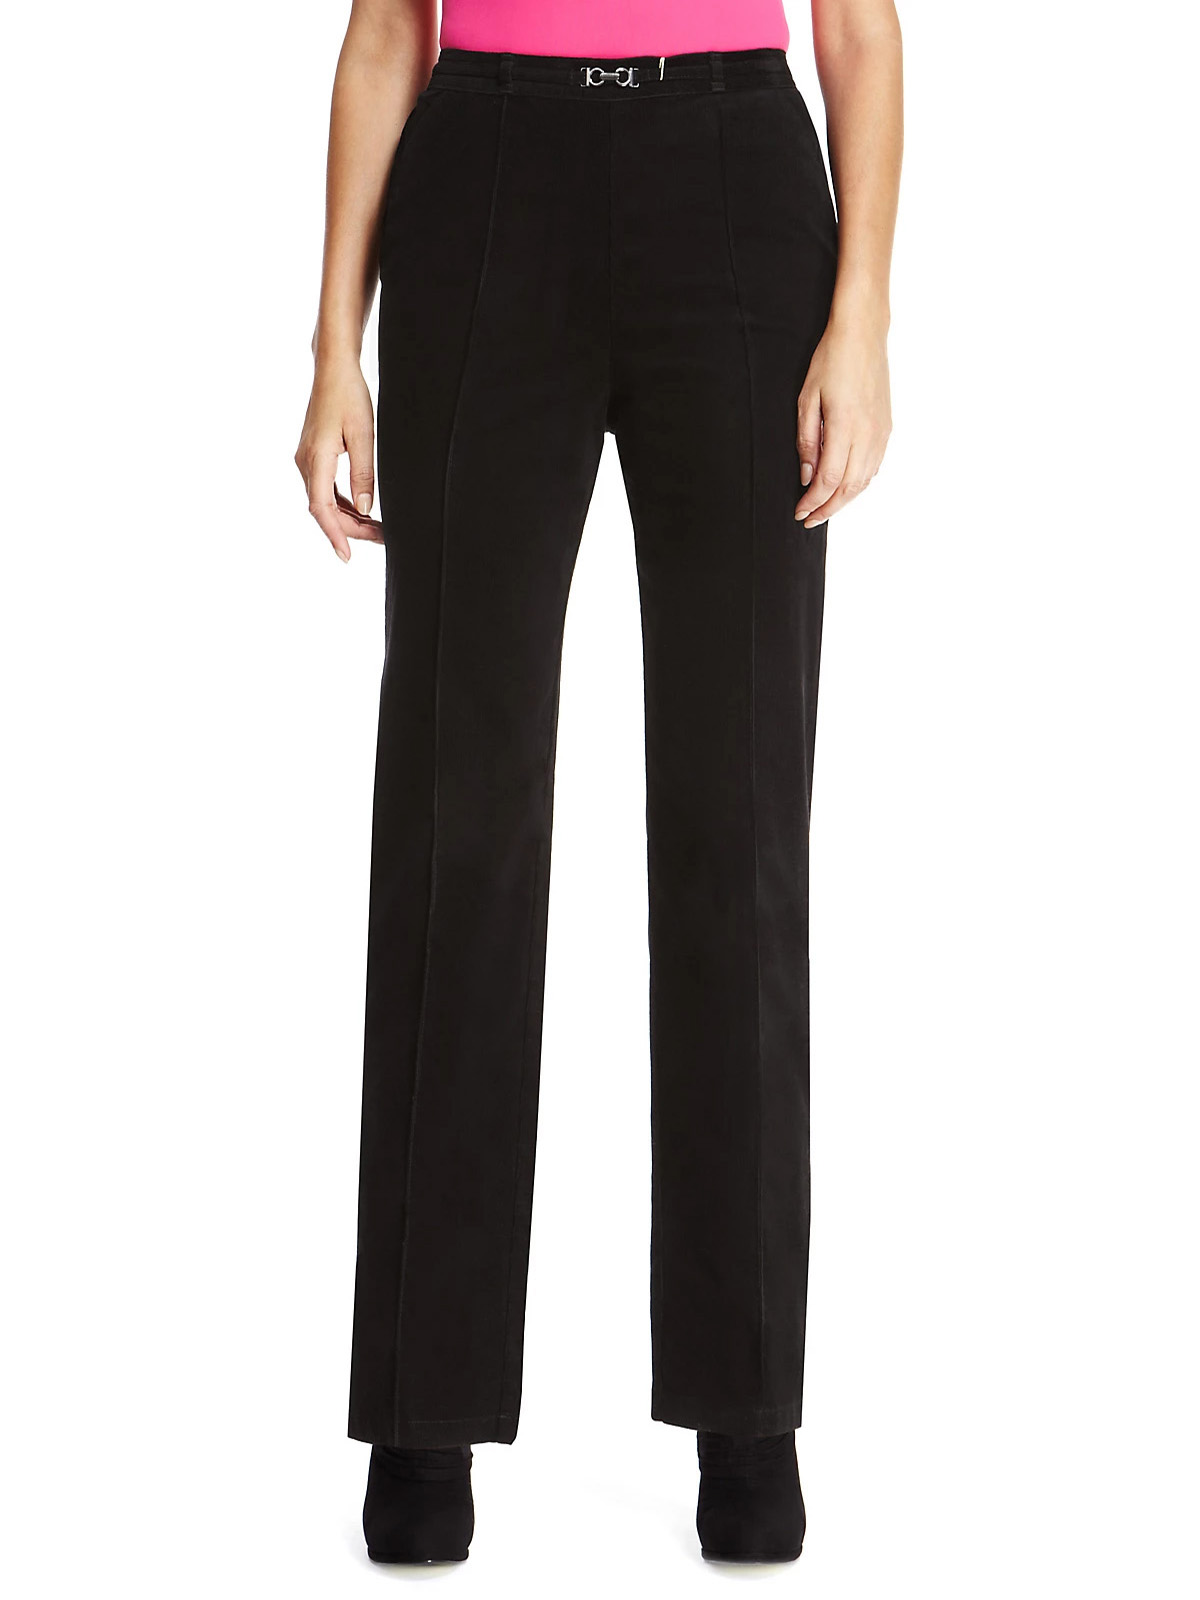 Marks and Spencer - - M&5 ASSORTED Ladies Trousers - Size 18 to 20